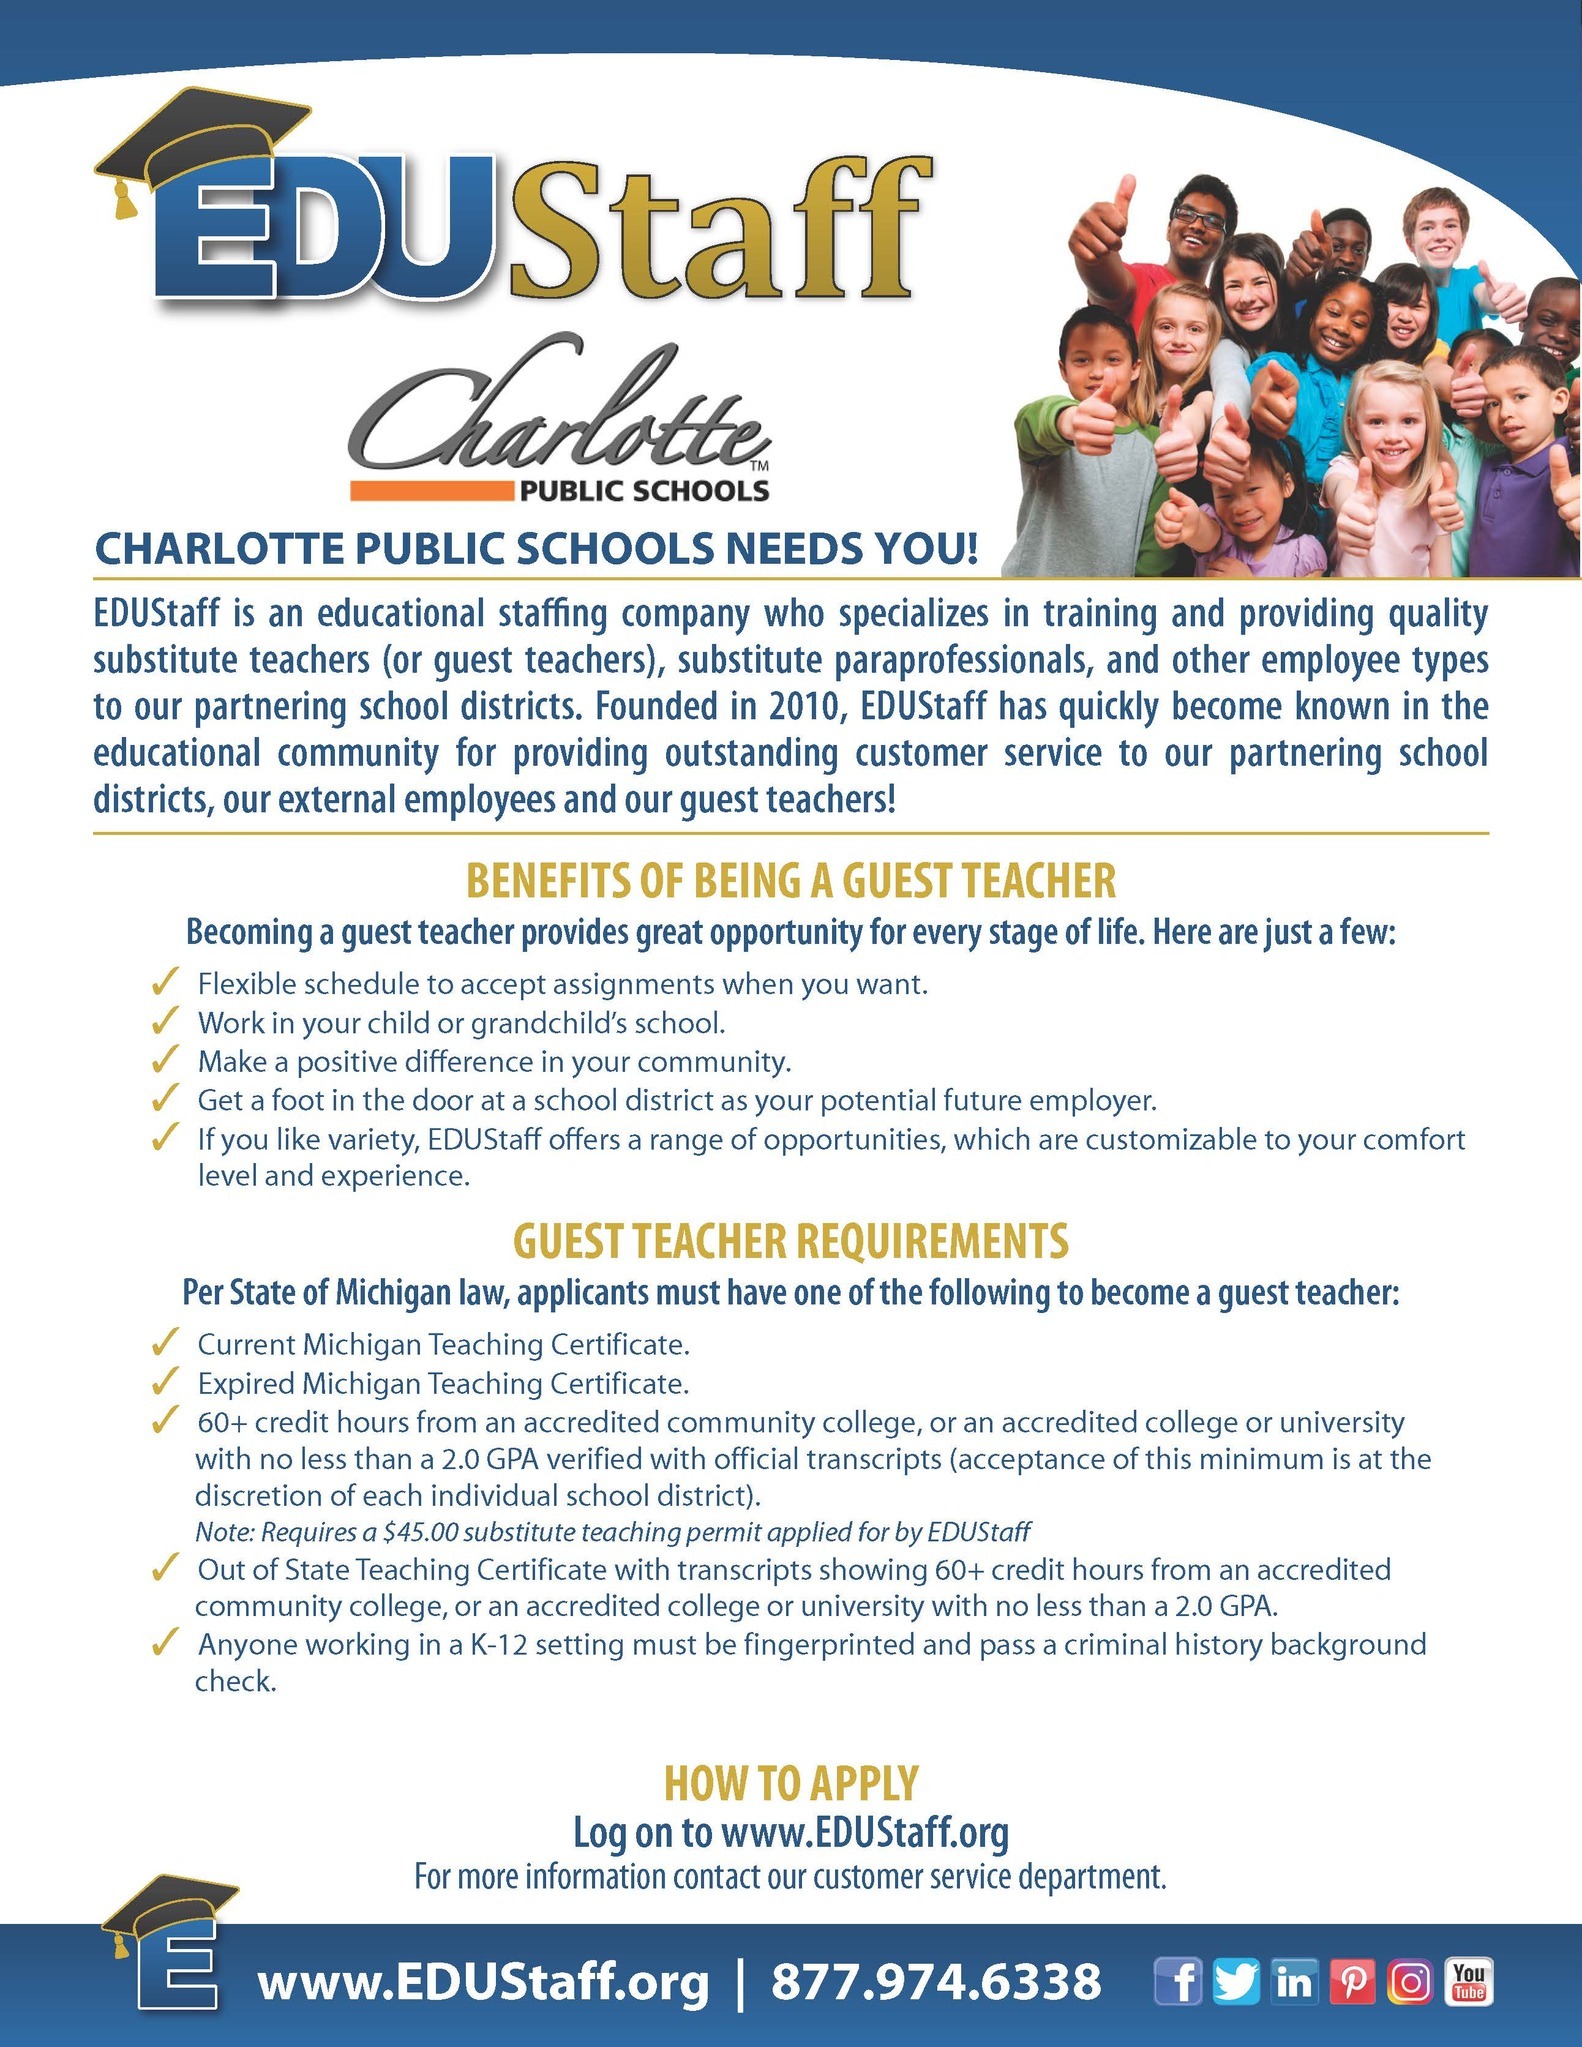 We need you.  Benefits of being a guest teacher at Charlotte Public Schools.